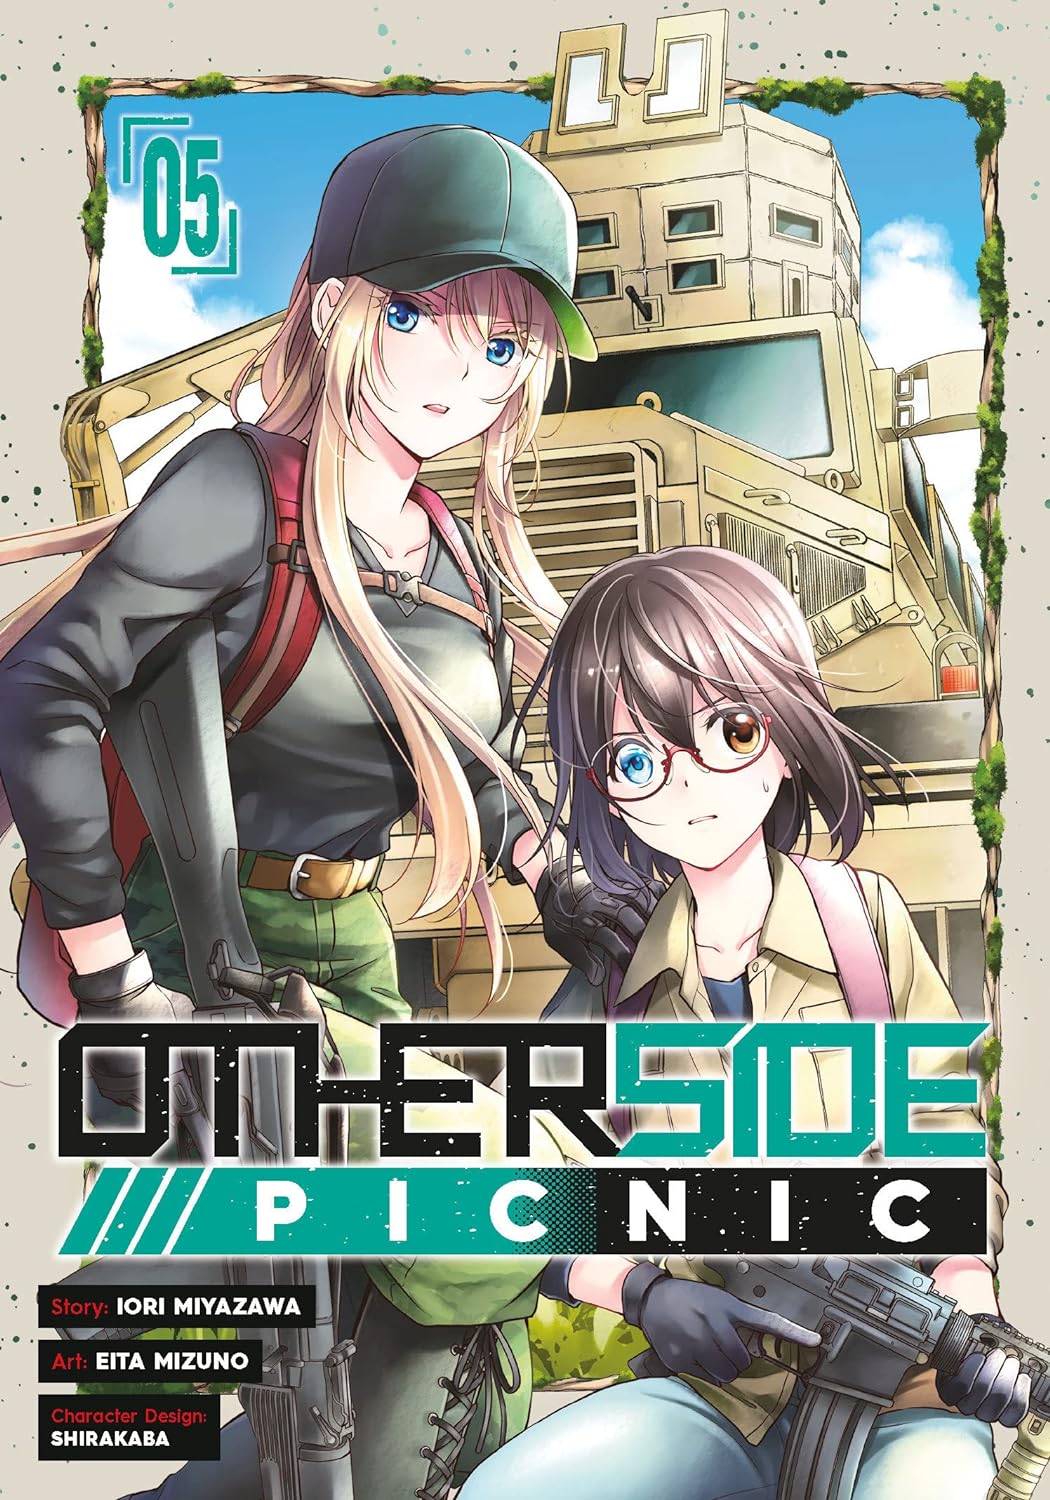 Otherside Picnic: Anime Review - Breaking it all Down